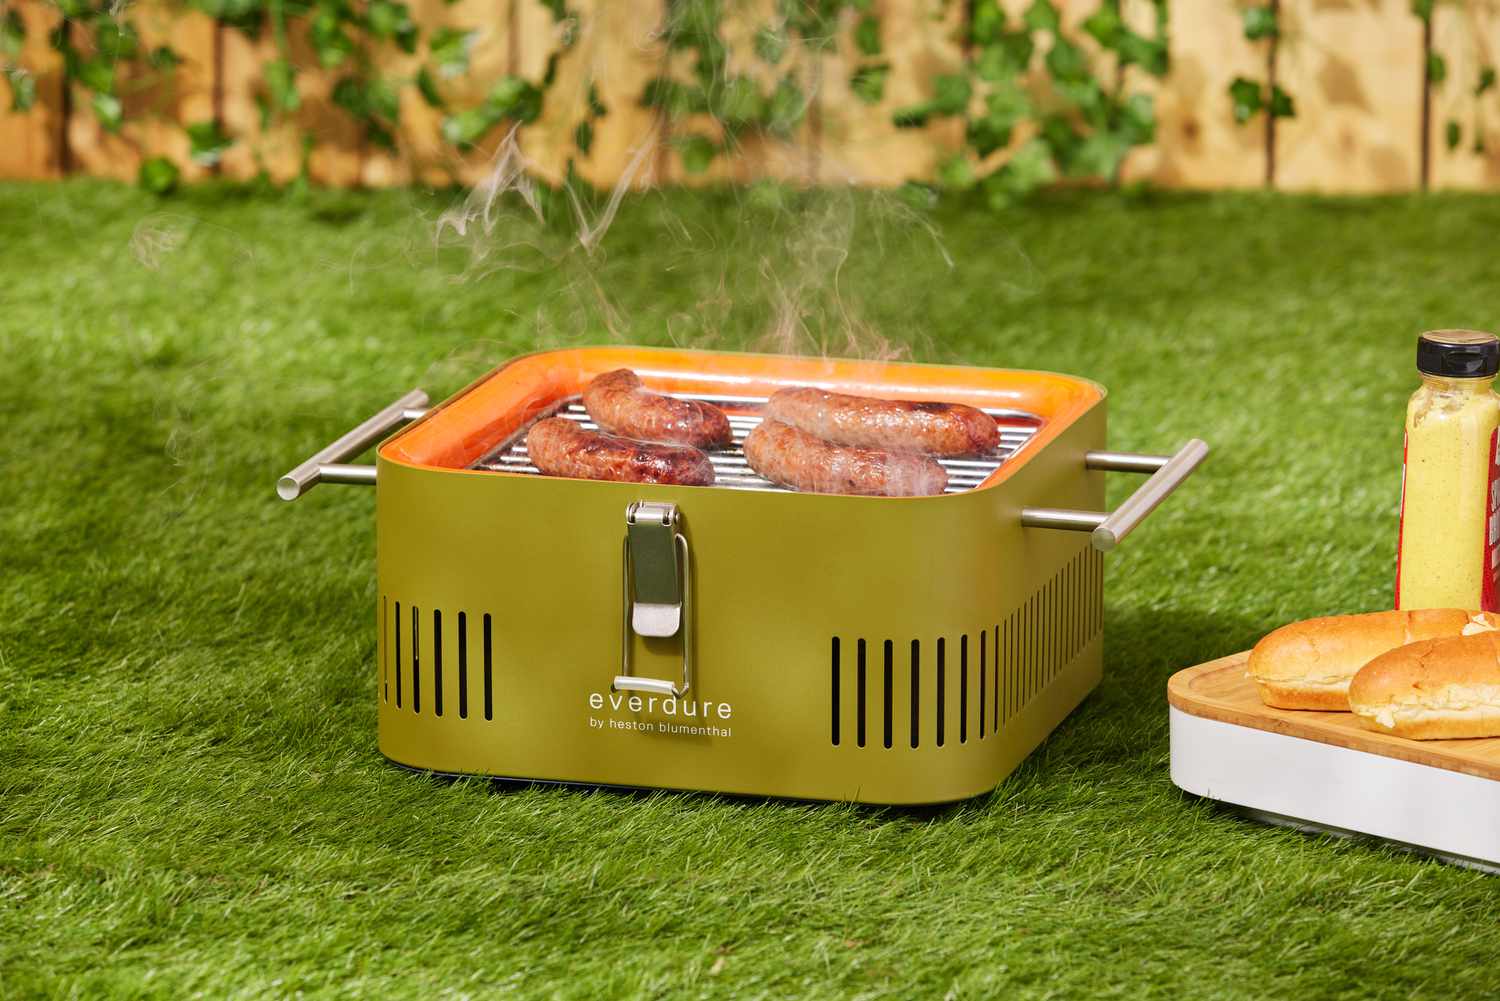 Sausage grilling on Everdure Cube Portable Charcoal Grill displayed on grass